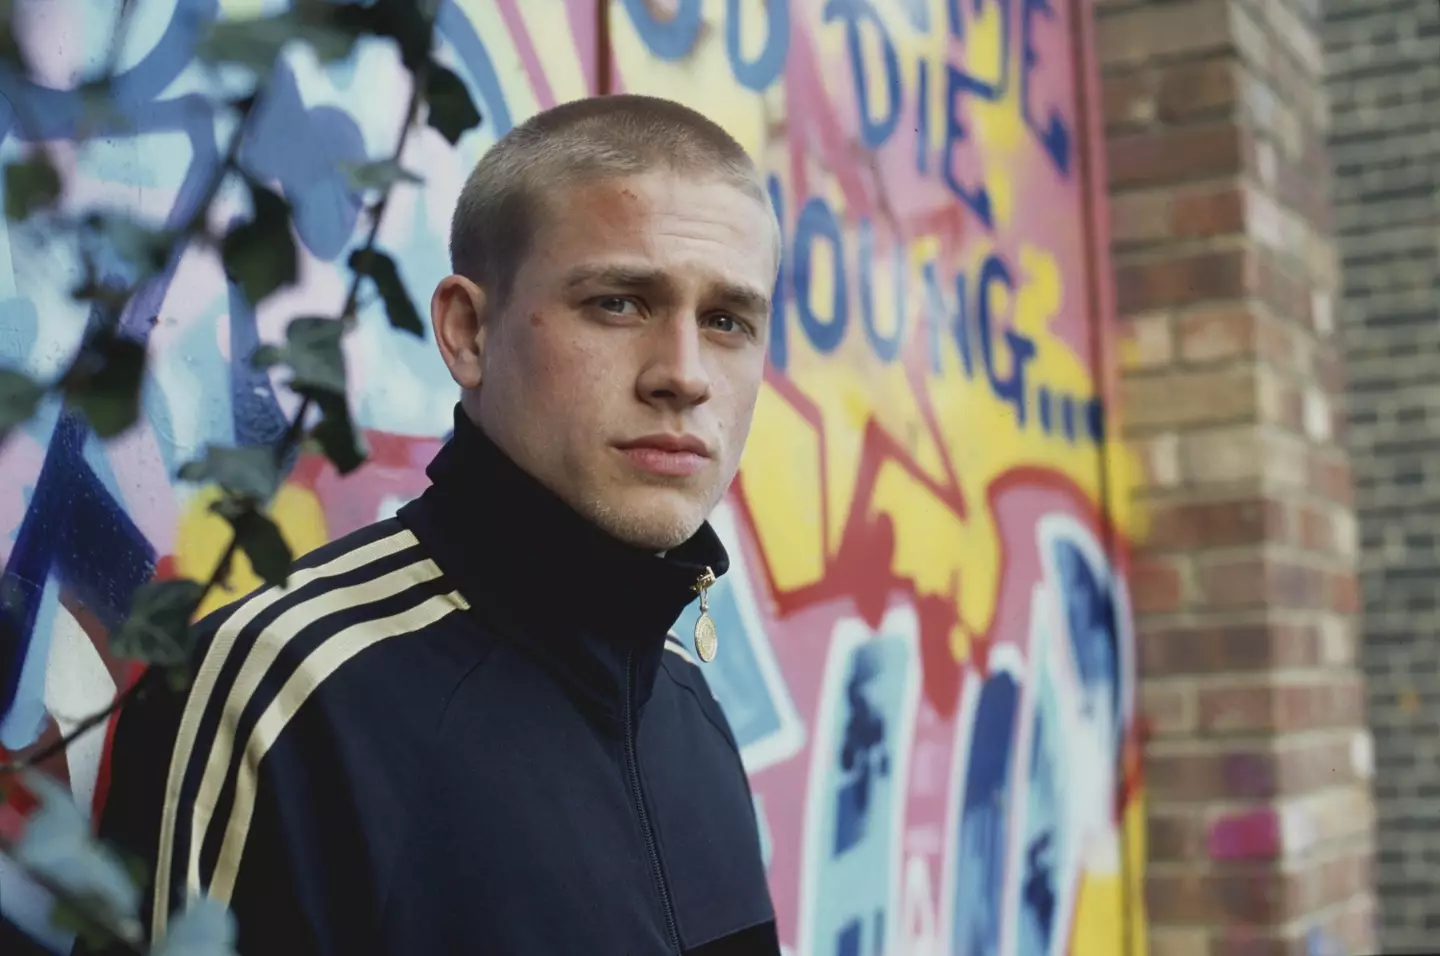 Charlie Hunnam played cockney Pete Dunham in Green Street (2005).